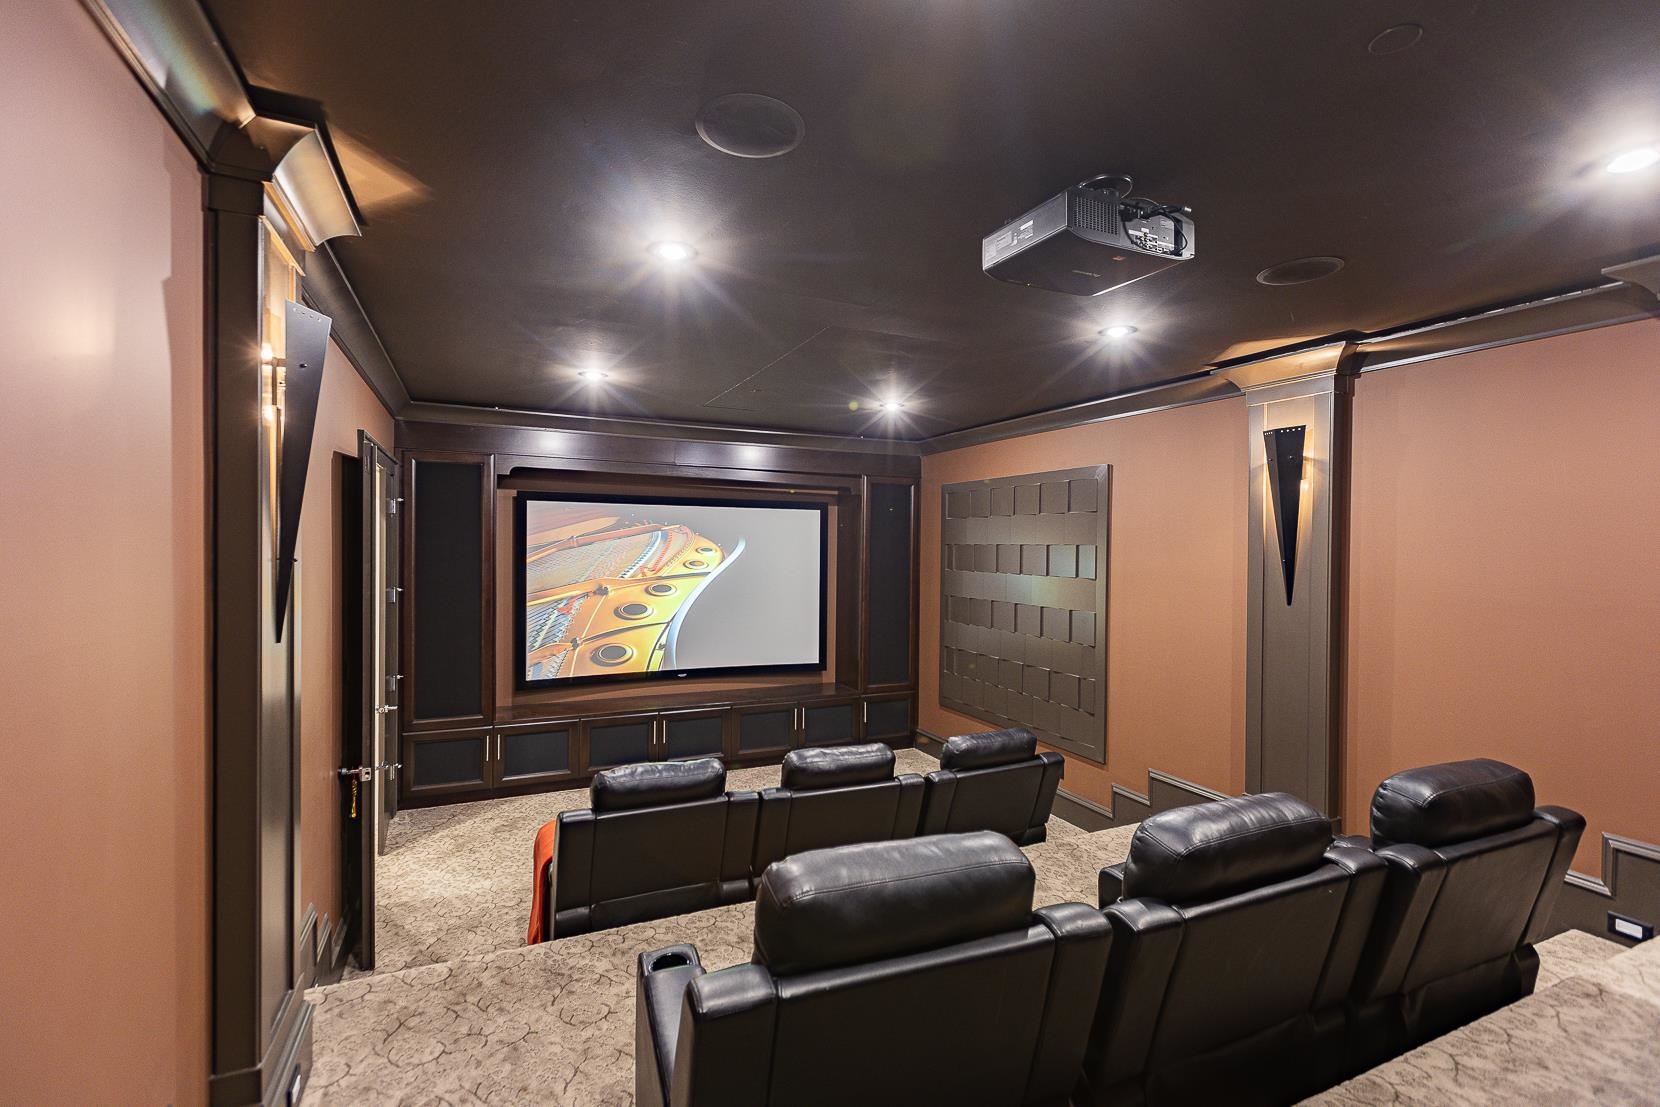 Immerse yourself in a cinematic experience in the privacy of your own home. Popcorn anyone?